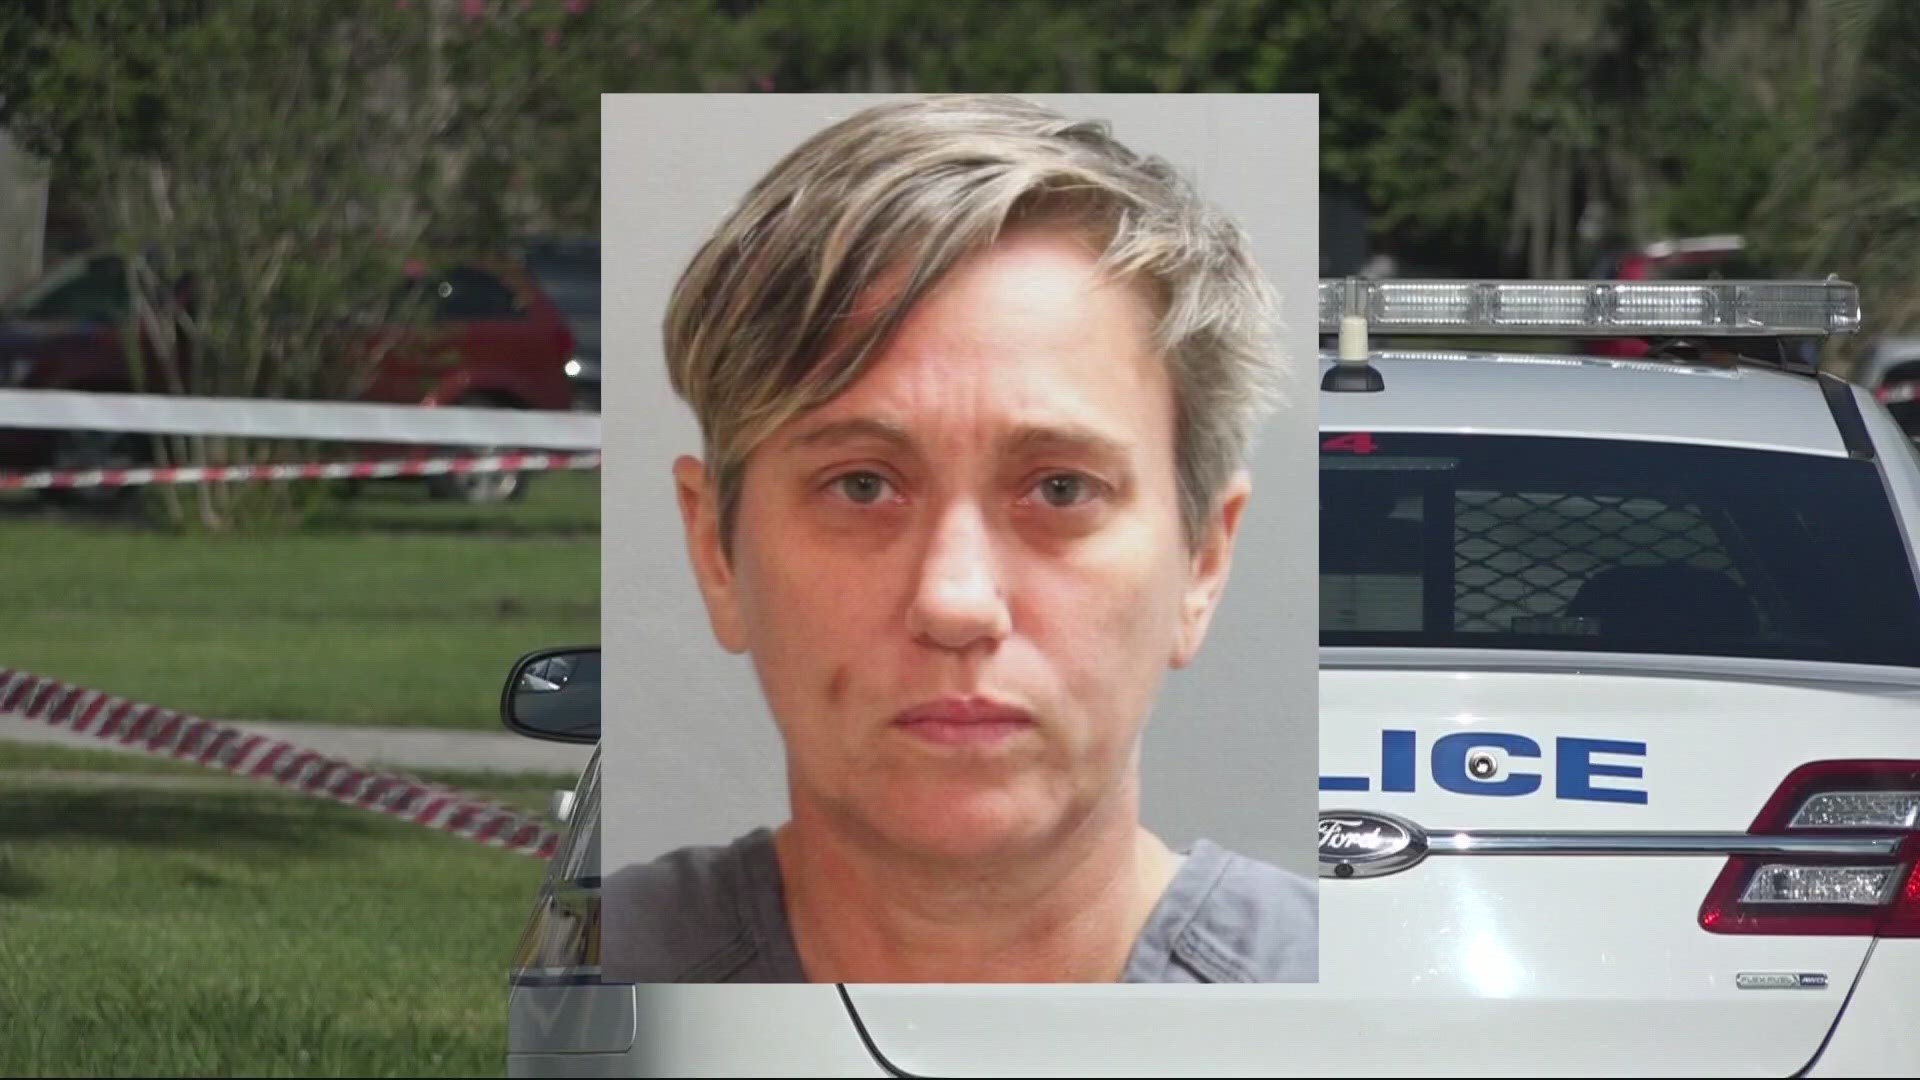 Remains found, missing woman, arrest made in Jacksonville firstcoastnews image